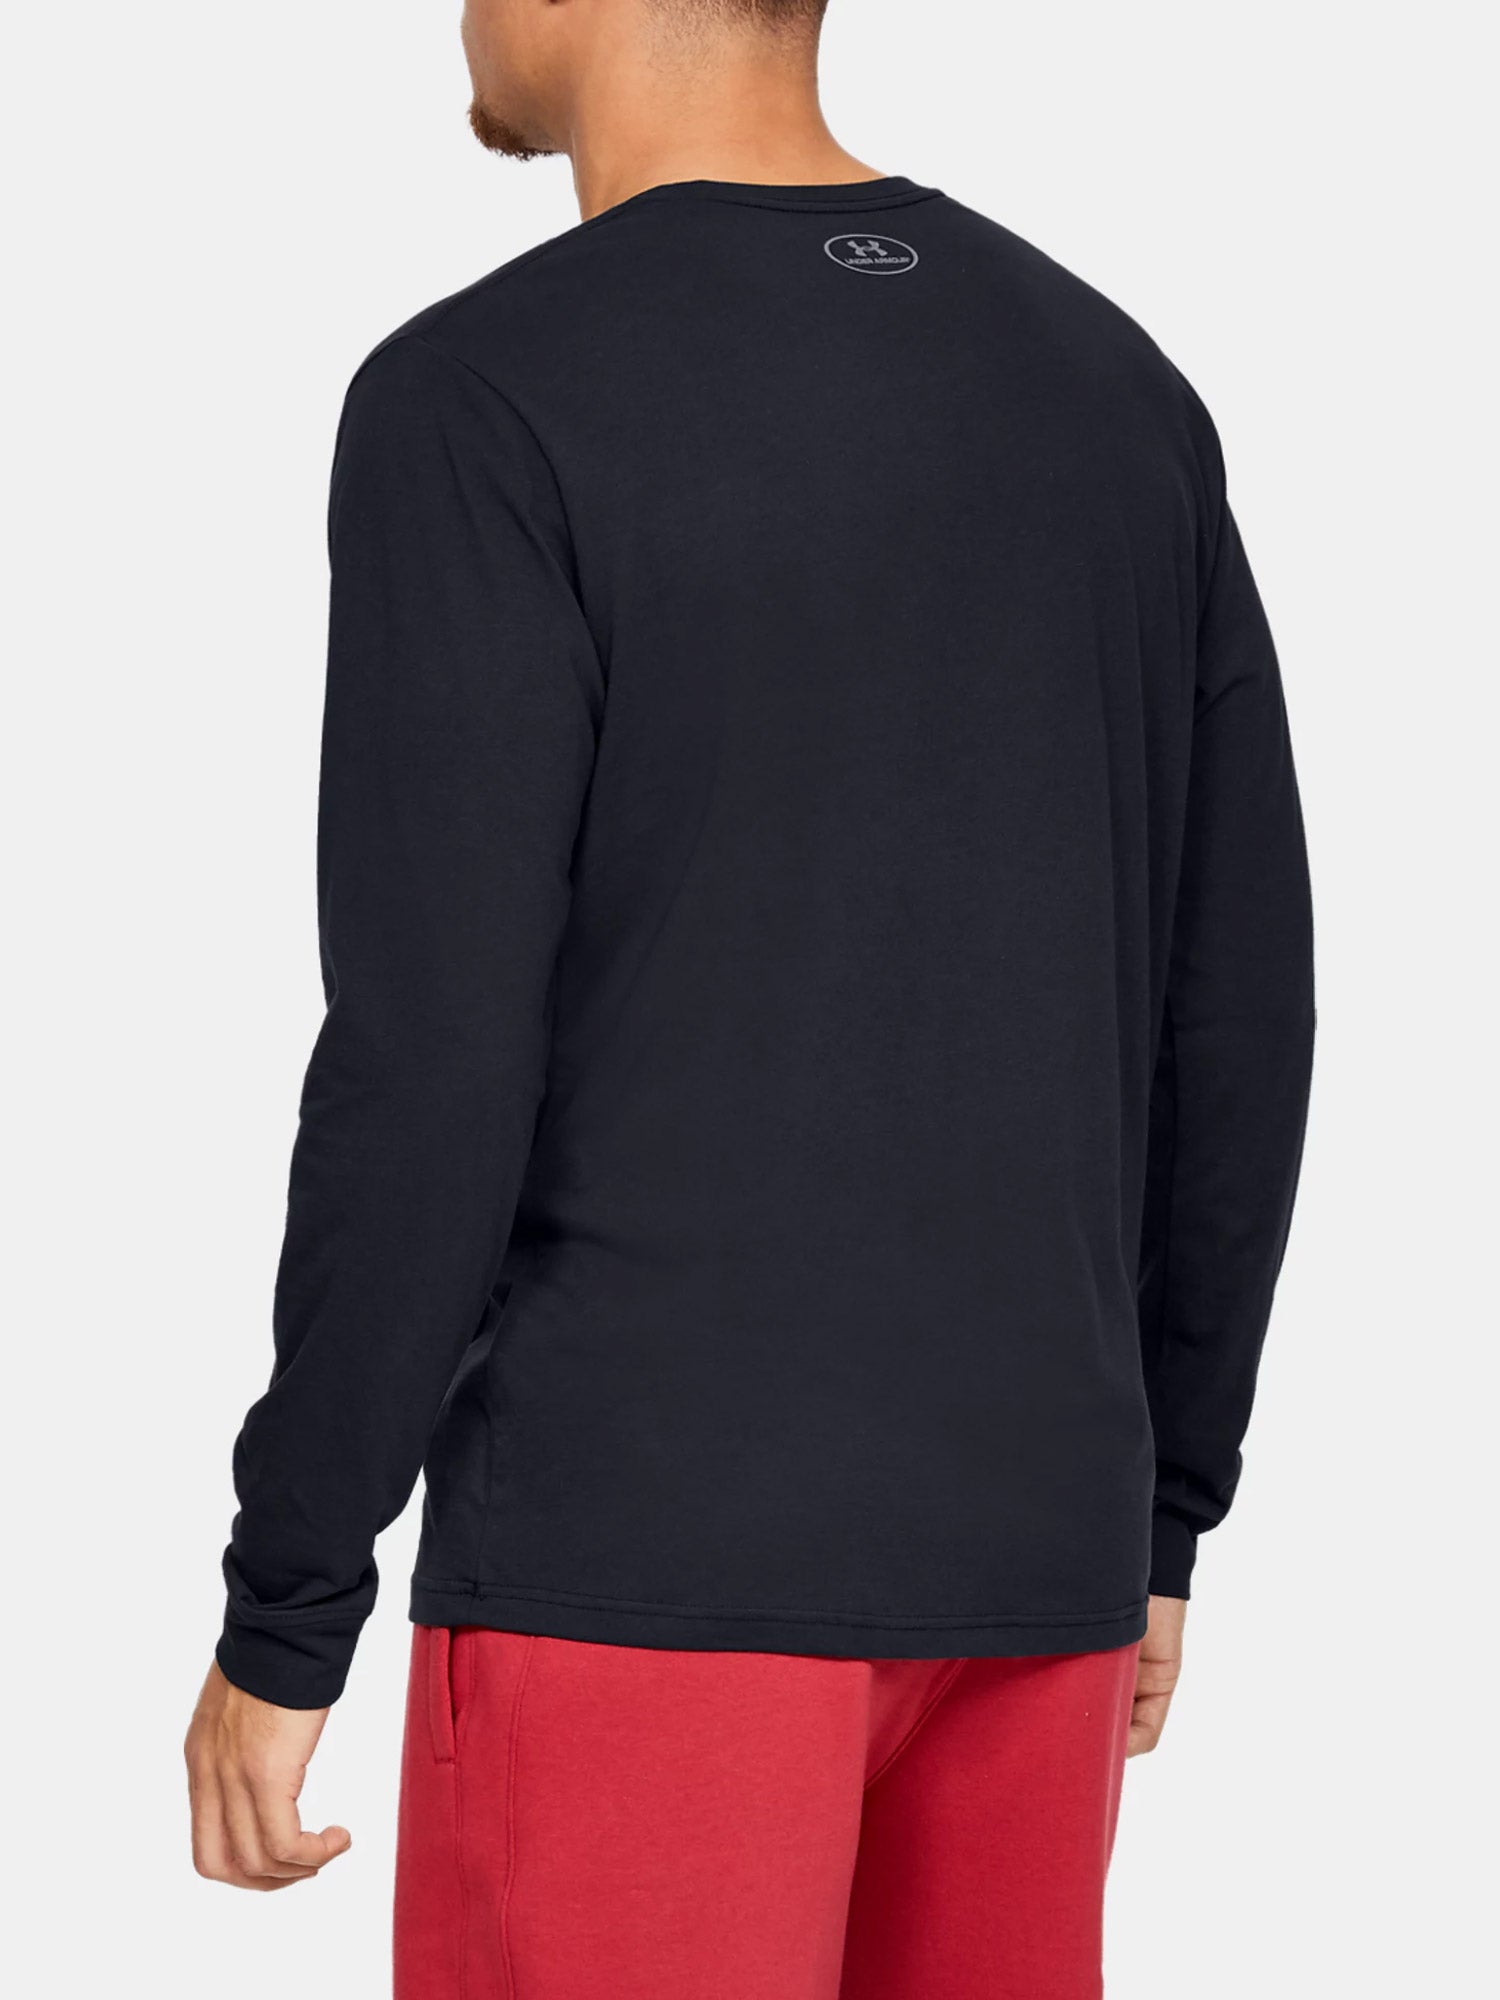 Under Armour 1329585 UA Sportstyle Left Chest Long Sleeve T-Shirt Black Back Model View